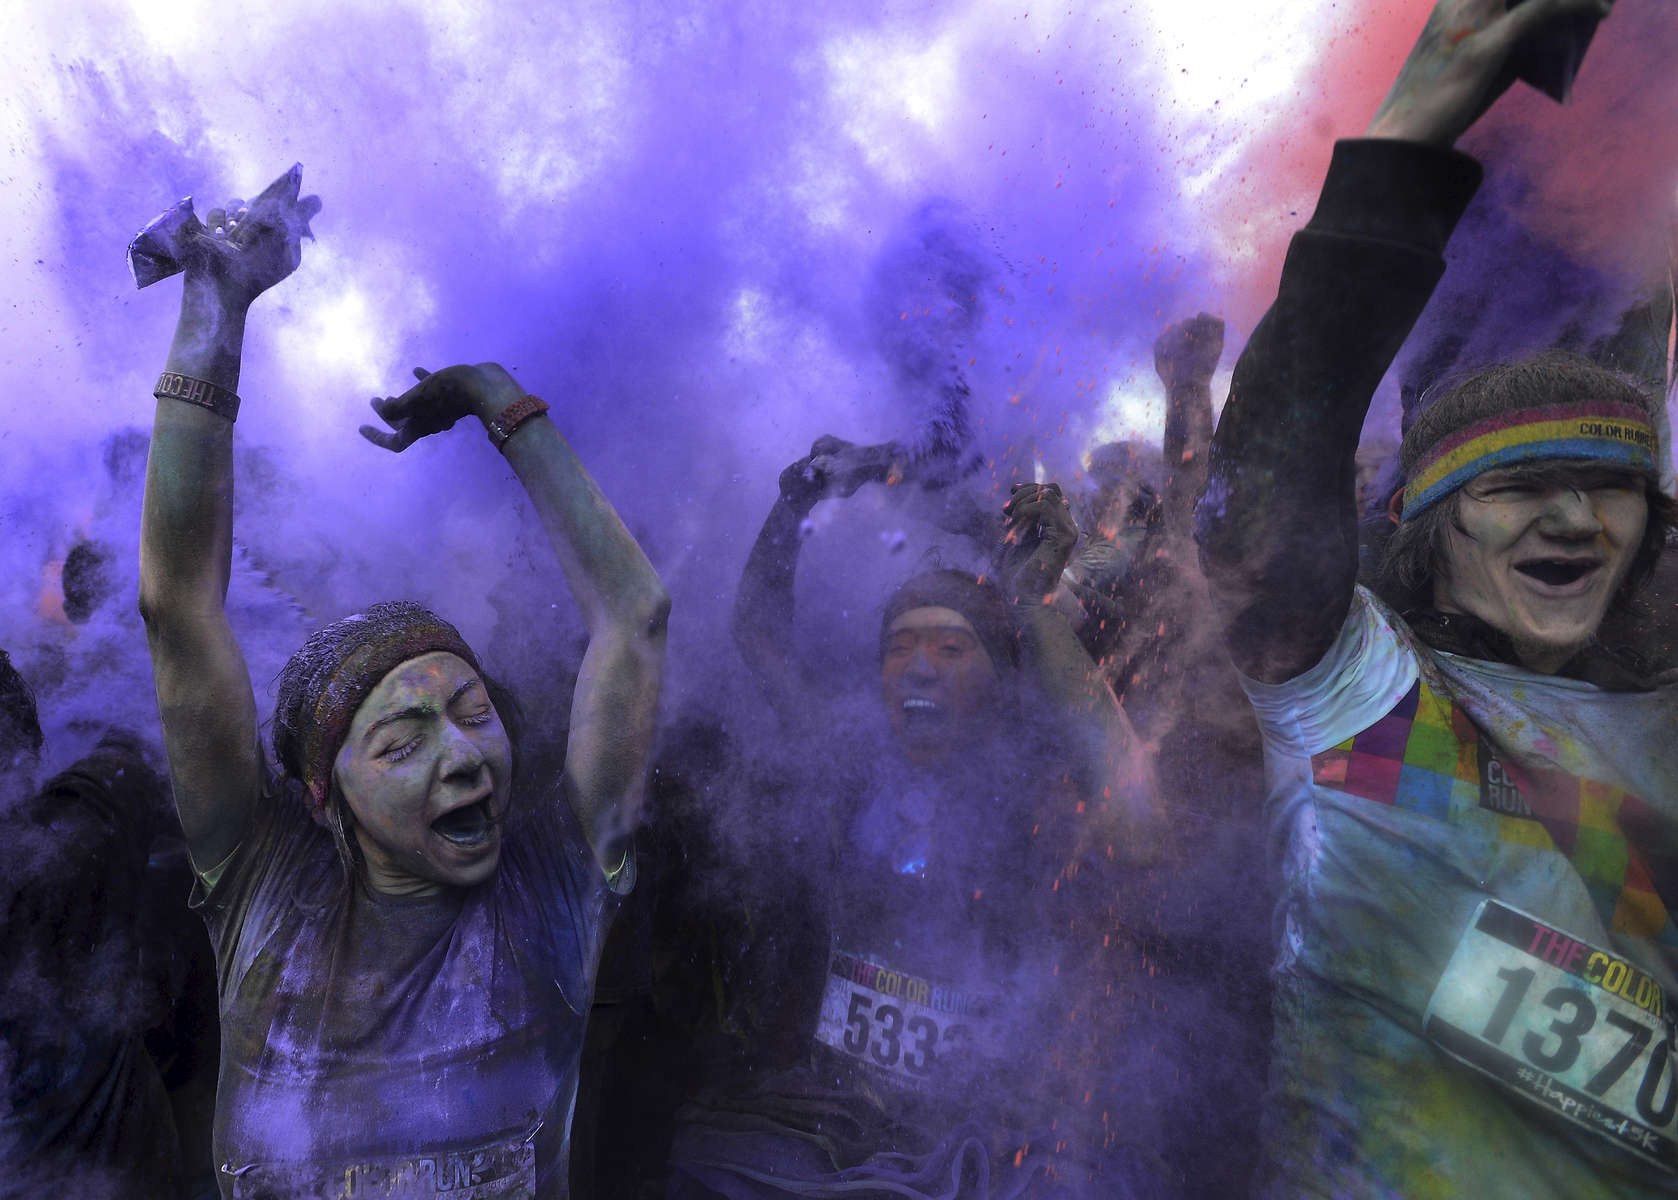 Runners celebrate as purple powder coats themat the end of the Color Run in Nashville, Tenn. (Mark Zaleski/ For The Tennessean)